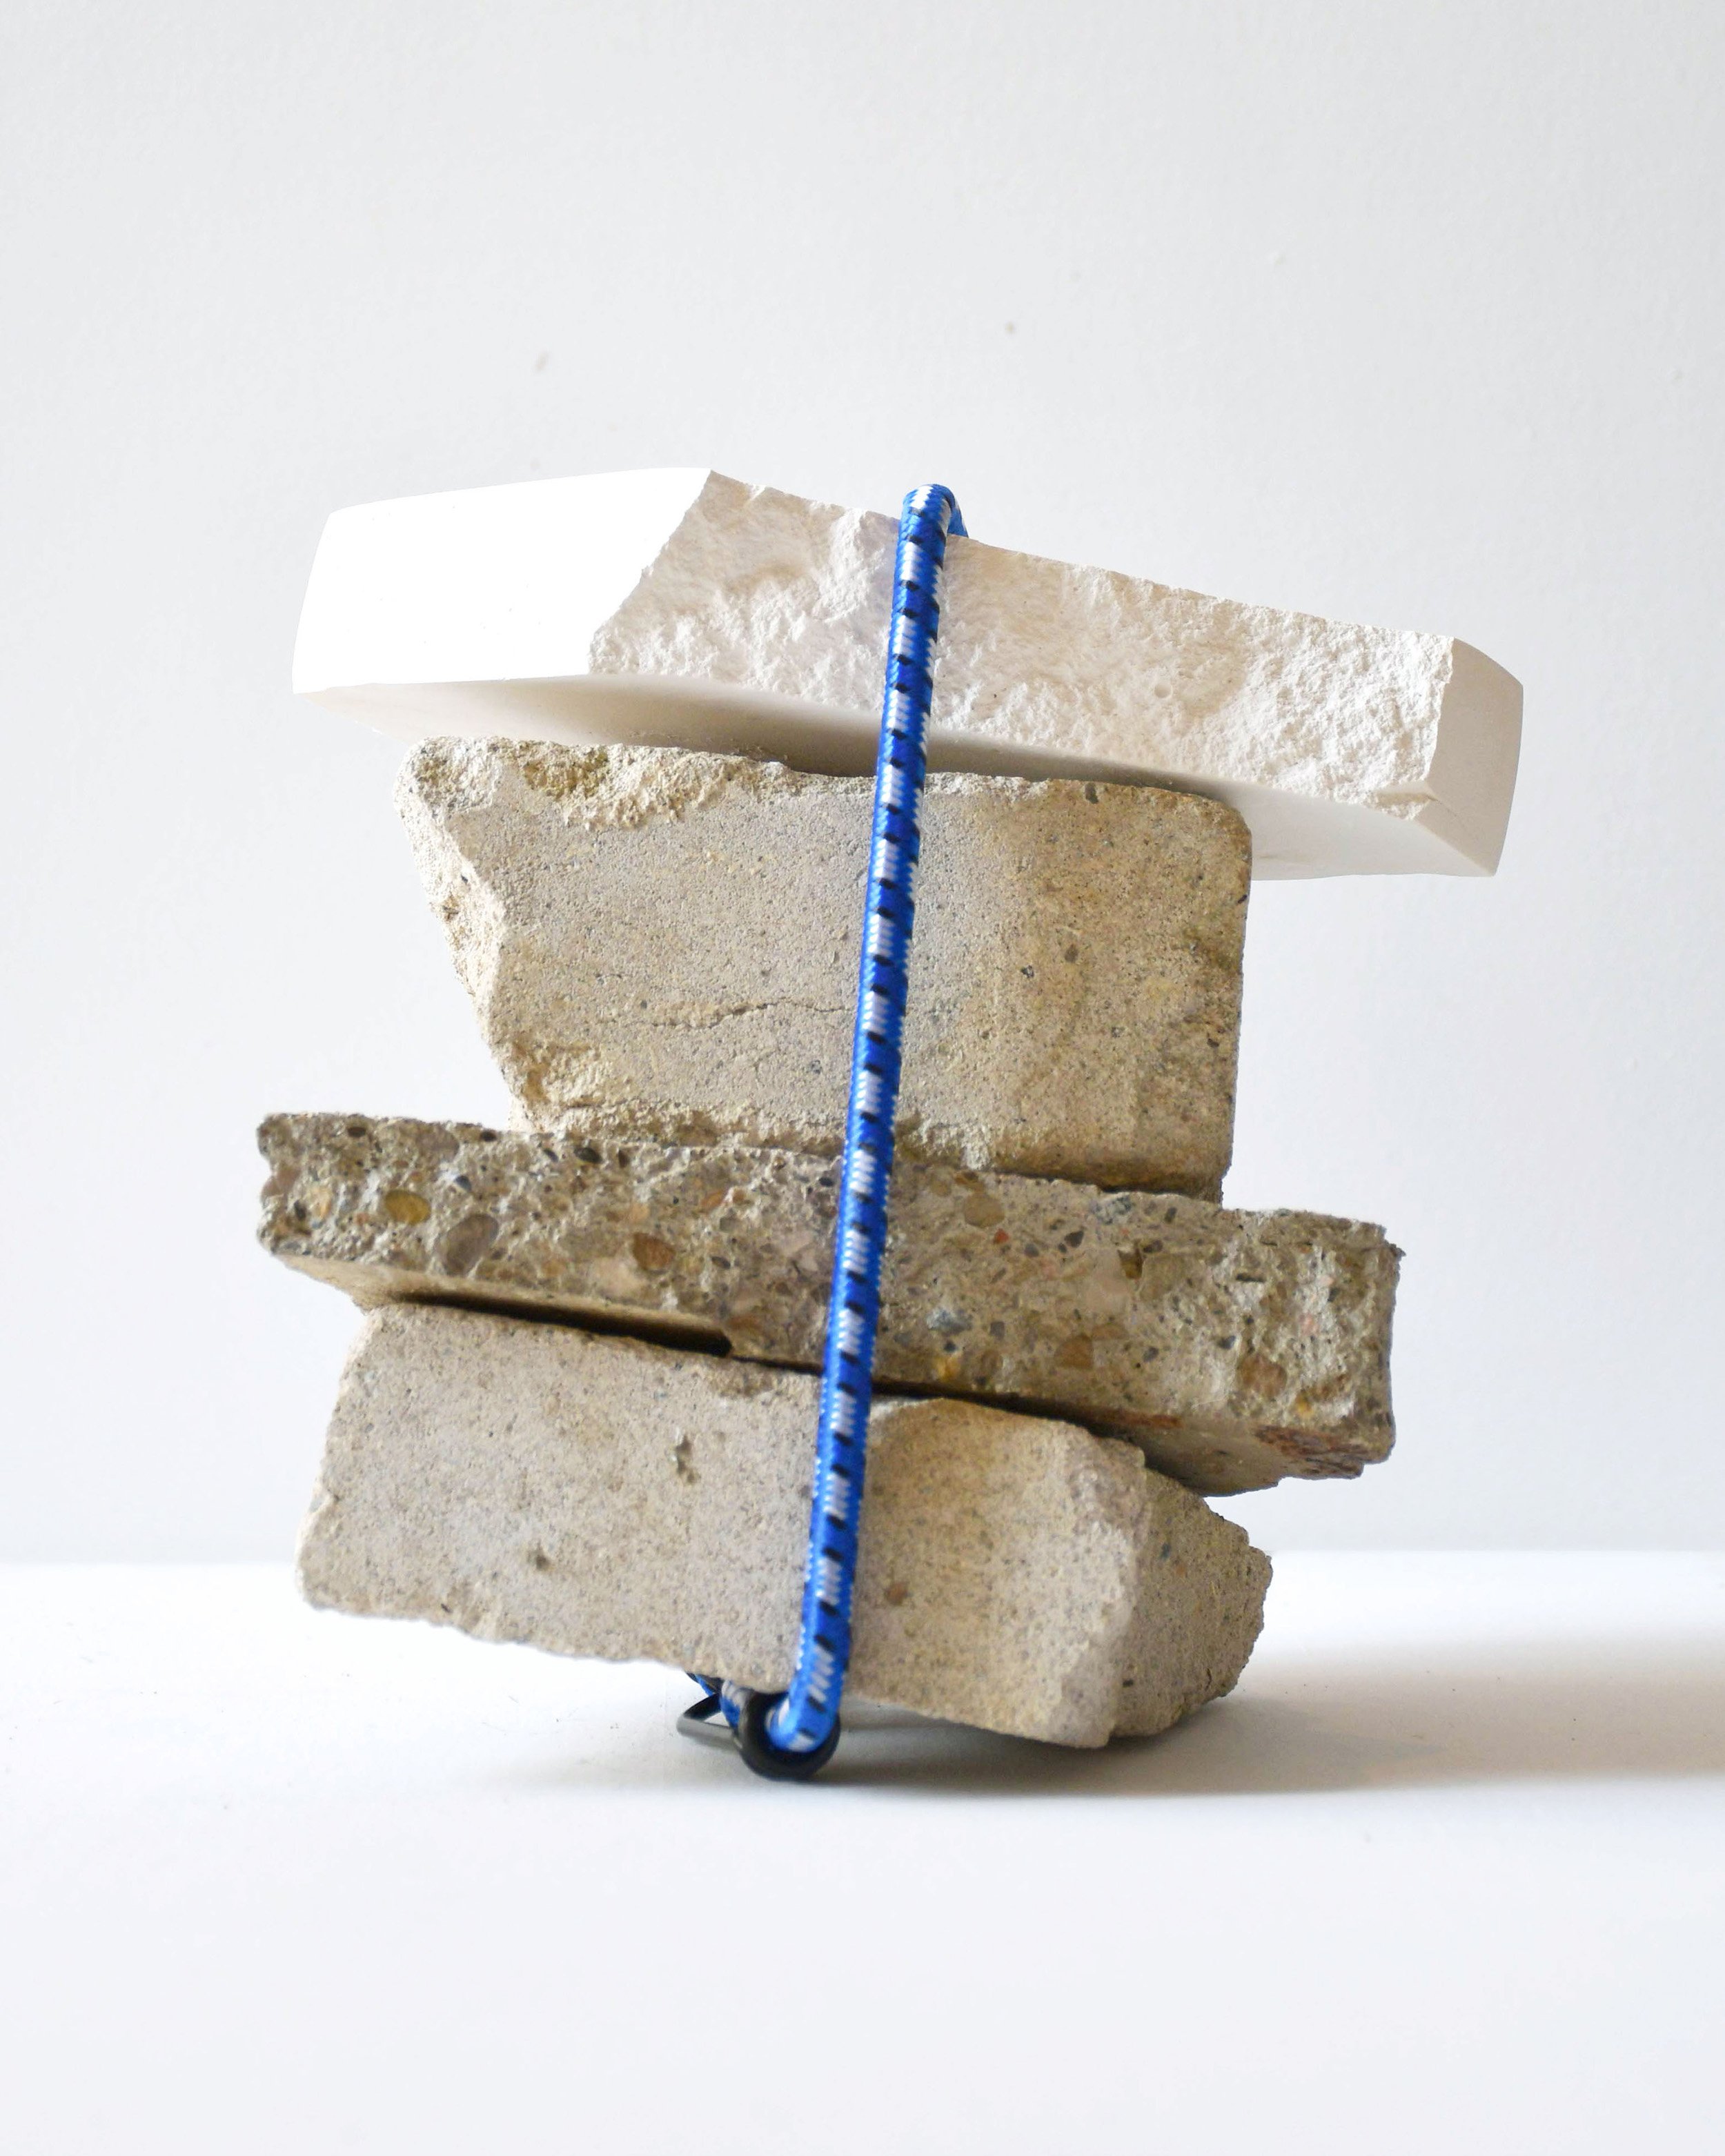   An image of Mel Hayes’ sculpture, Hold Me Time. Four rectangular blocks of white concrete and stone are held together by a blue bungee cord on a white surface against a white background.&nbsp;  